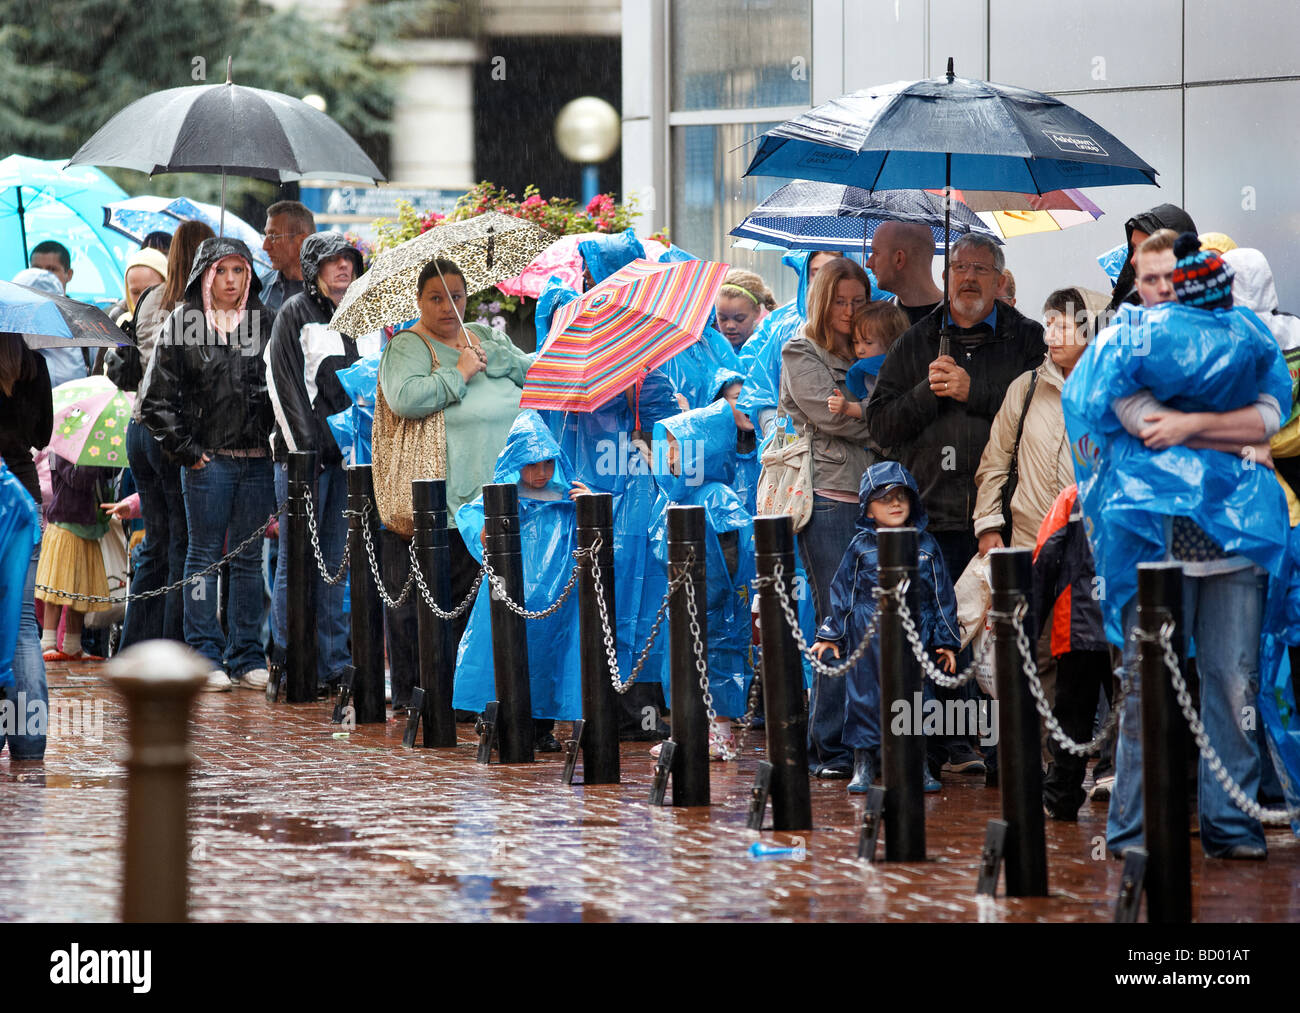 Visitors to the Sealife Centre in Birmingham, UK, queue outside in the rain. Stock Photo